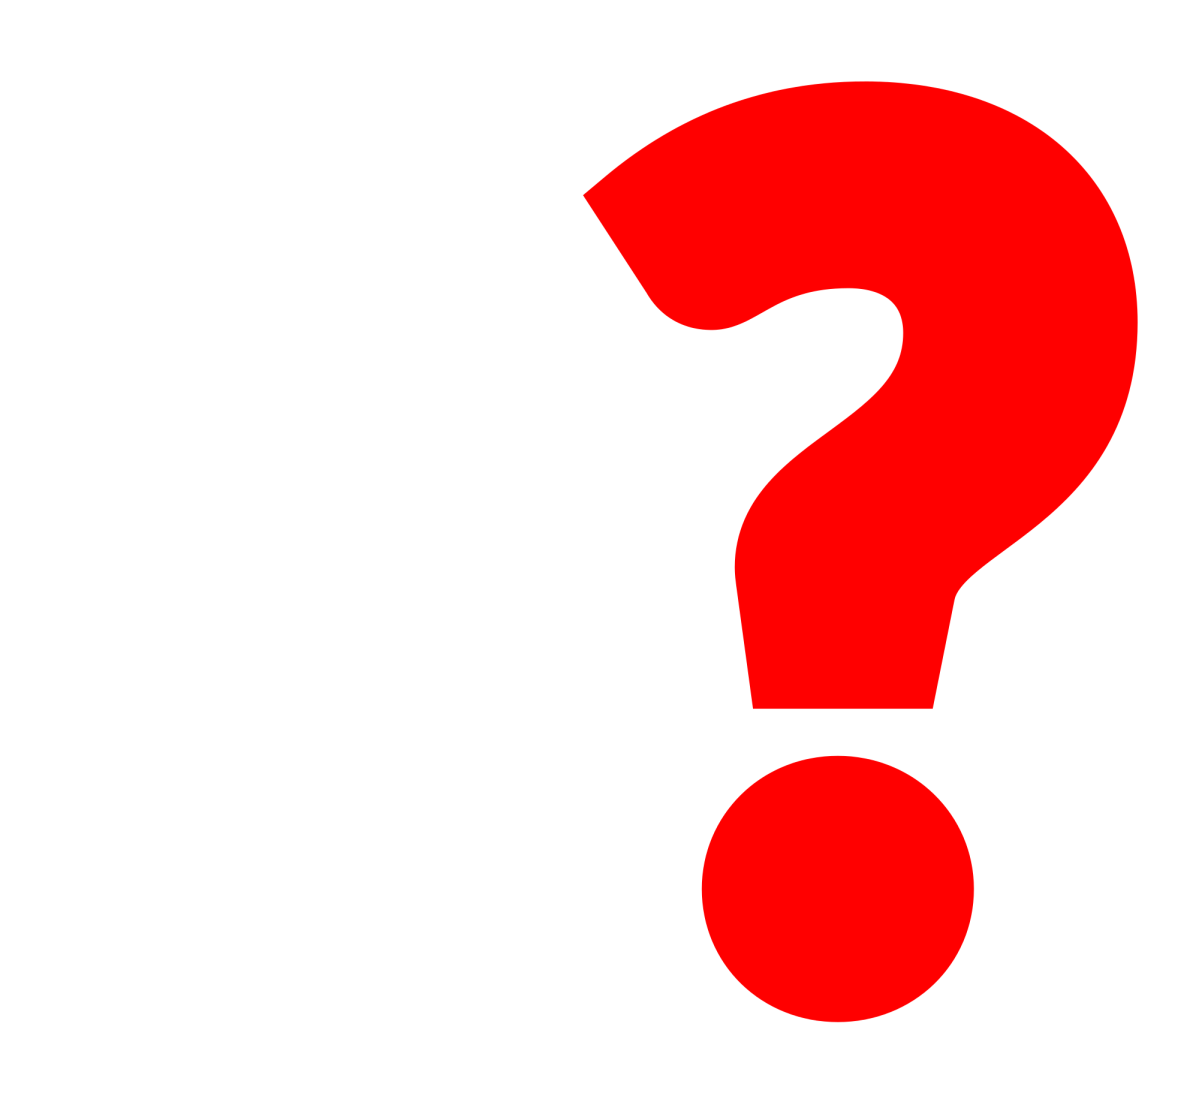 red clip art question mark - photo #39